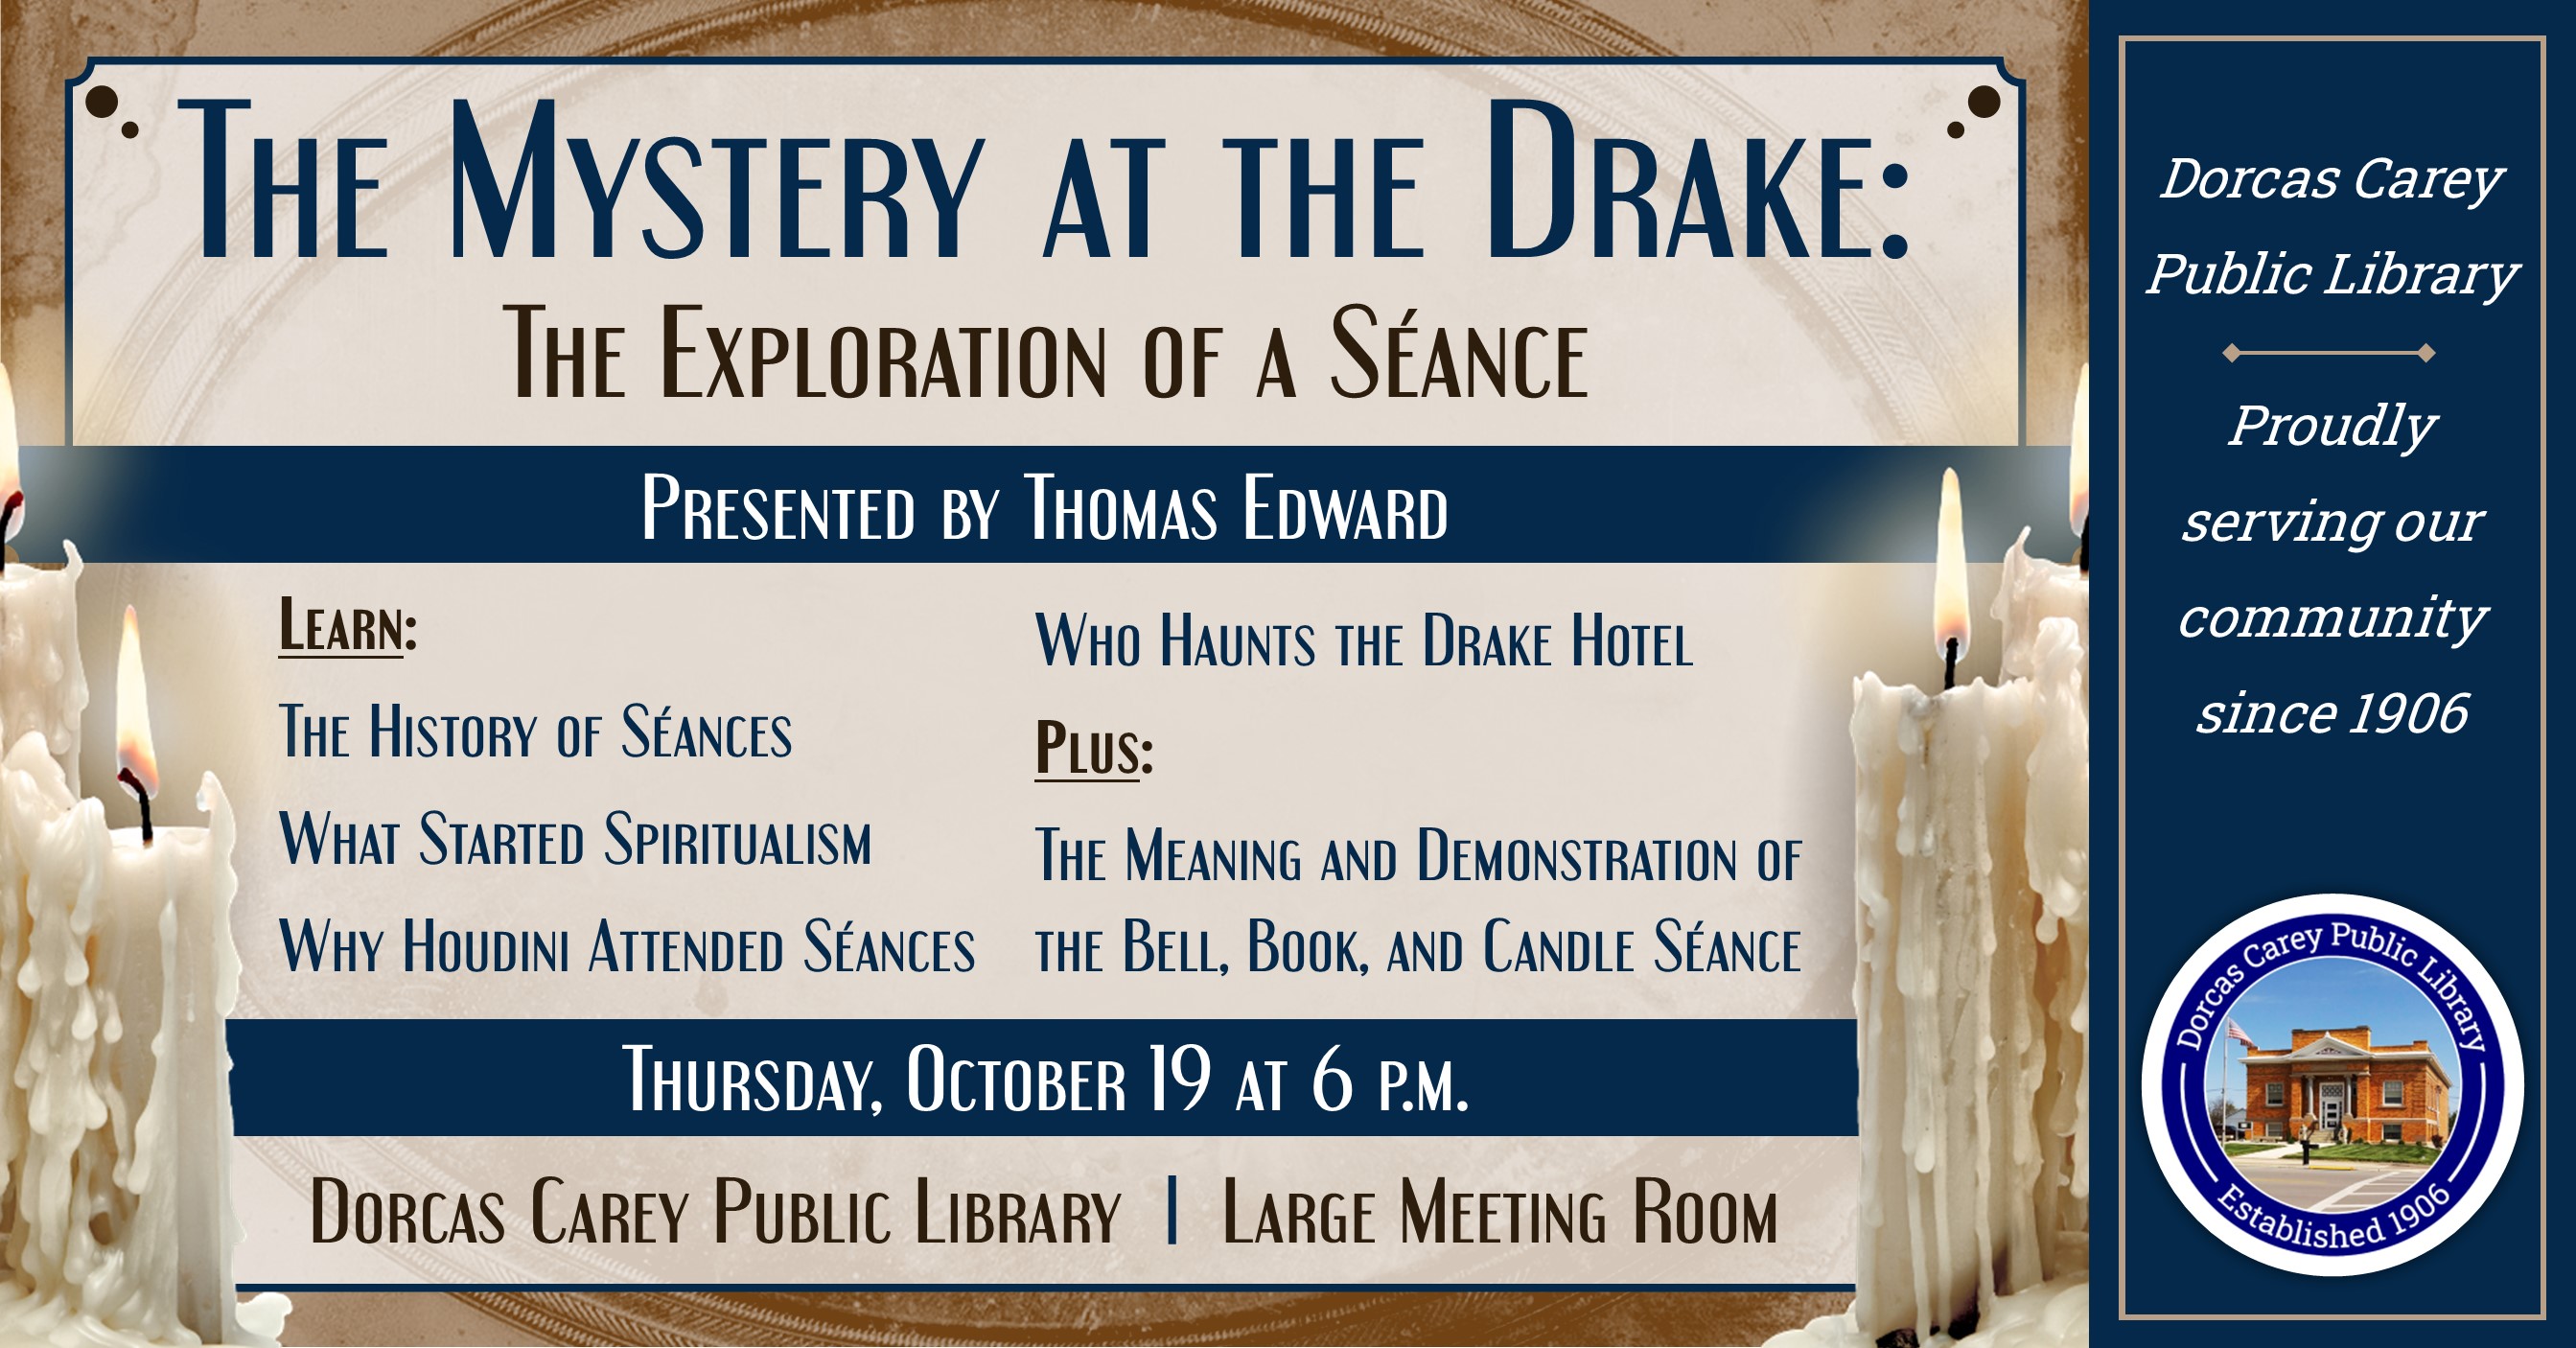 Thomas Dowling will present:  The Mystery at the Drake (The Exploration of a Séance) at 6 p.m. at the library.  Explore the hauntings of the Drake Hotel, the 2nd most haunted building in Illinois and learn about the history of seances. The experience will conclude with a “mock” séance.   You will learn about the history of seances, why Houdini attended seances, the meaning and demonstration of the bell, book and candle séance.  Educational & fun audience participation!